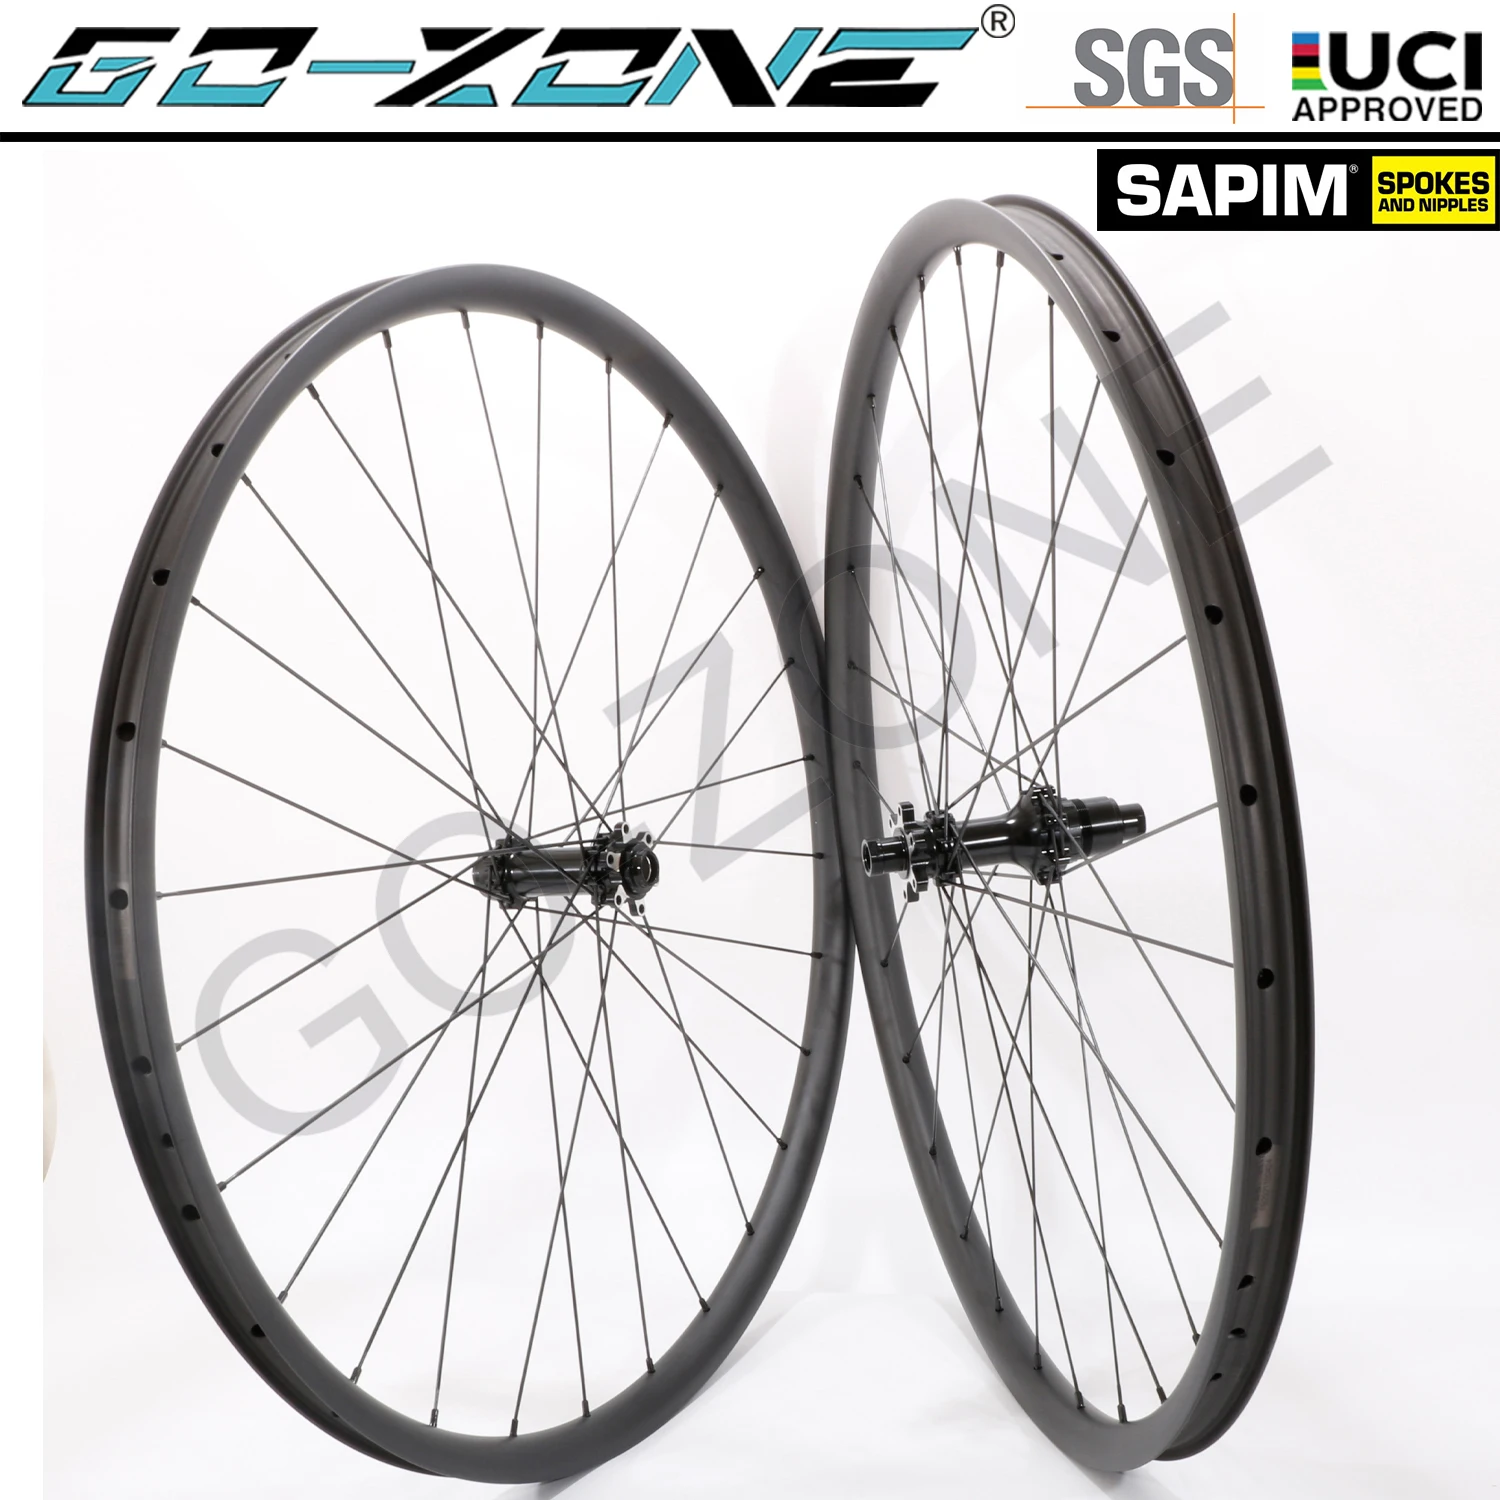 

29er Carbon MTB Wheels Tubeless Super Light GO-ZONE PRO4 Sapim Thru Axle / Quick Release / Boost UCI Approved MTB Wheelset 29